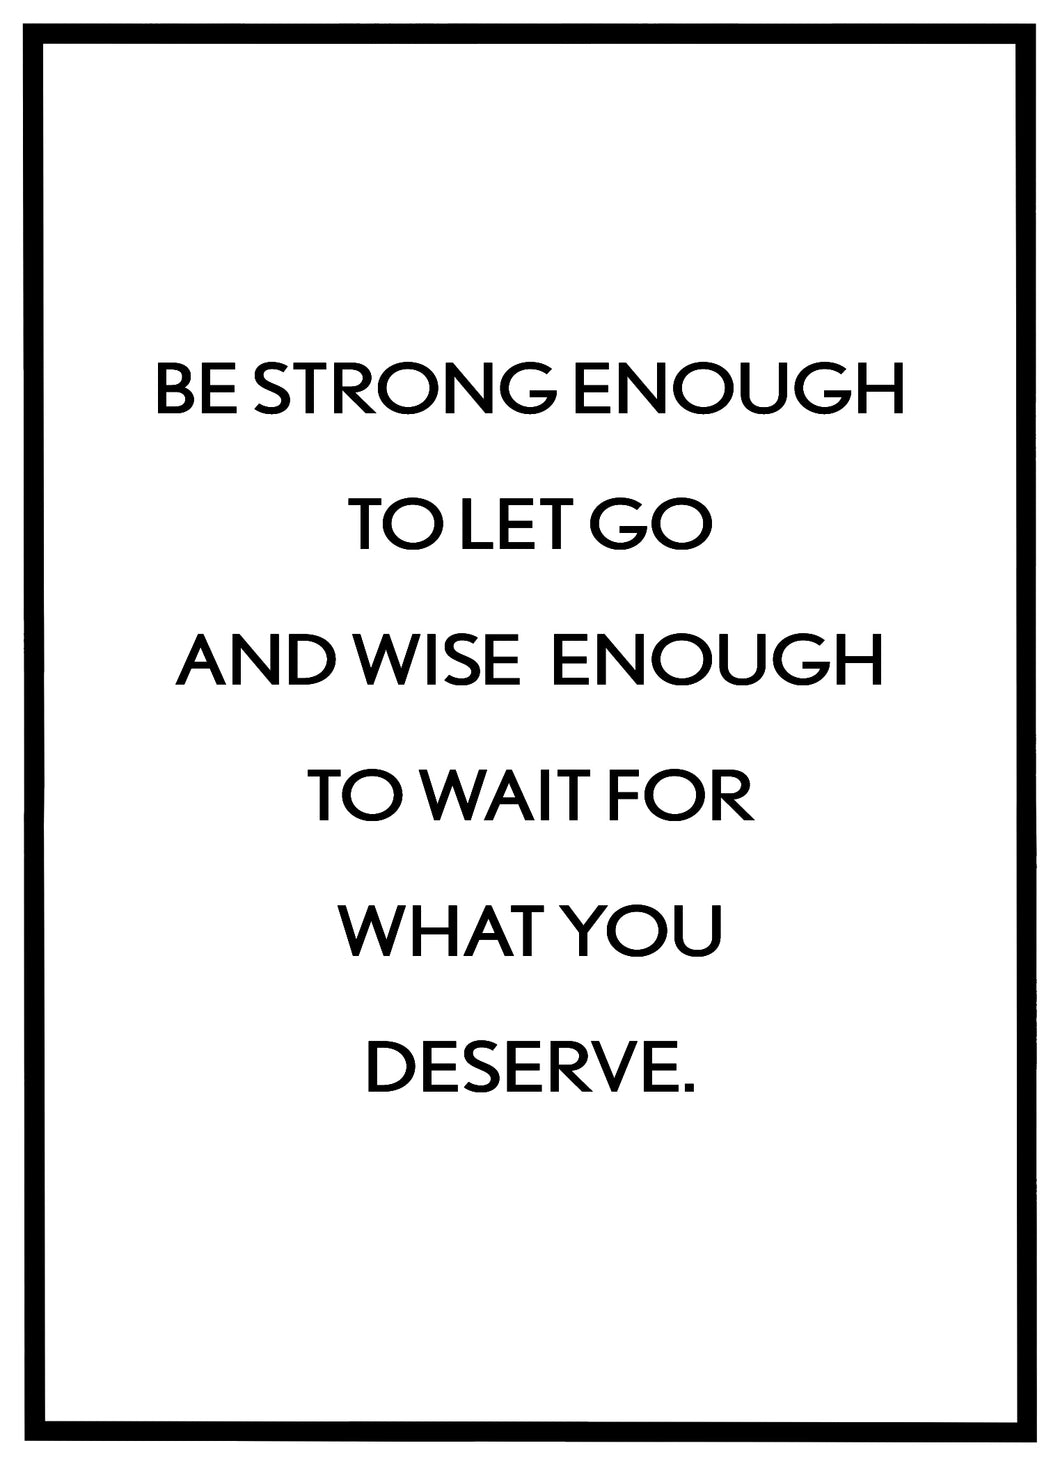 Be Strong - Plakat